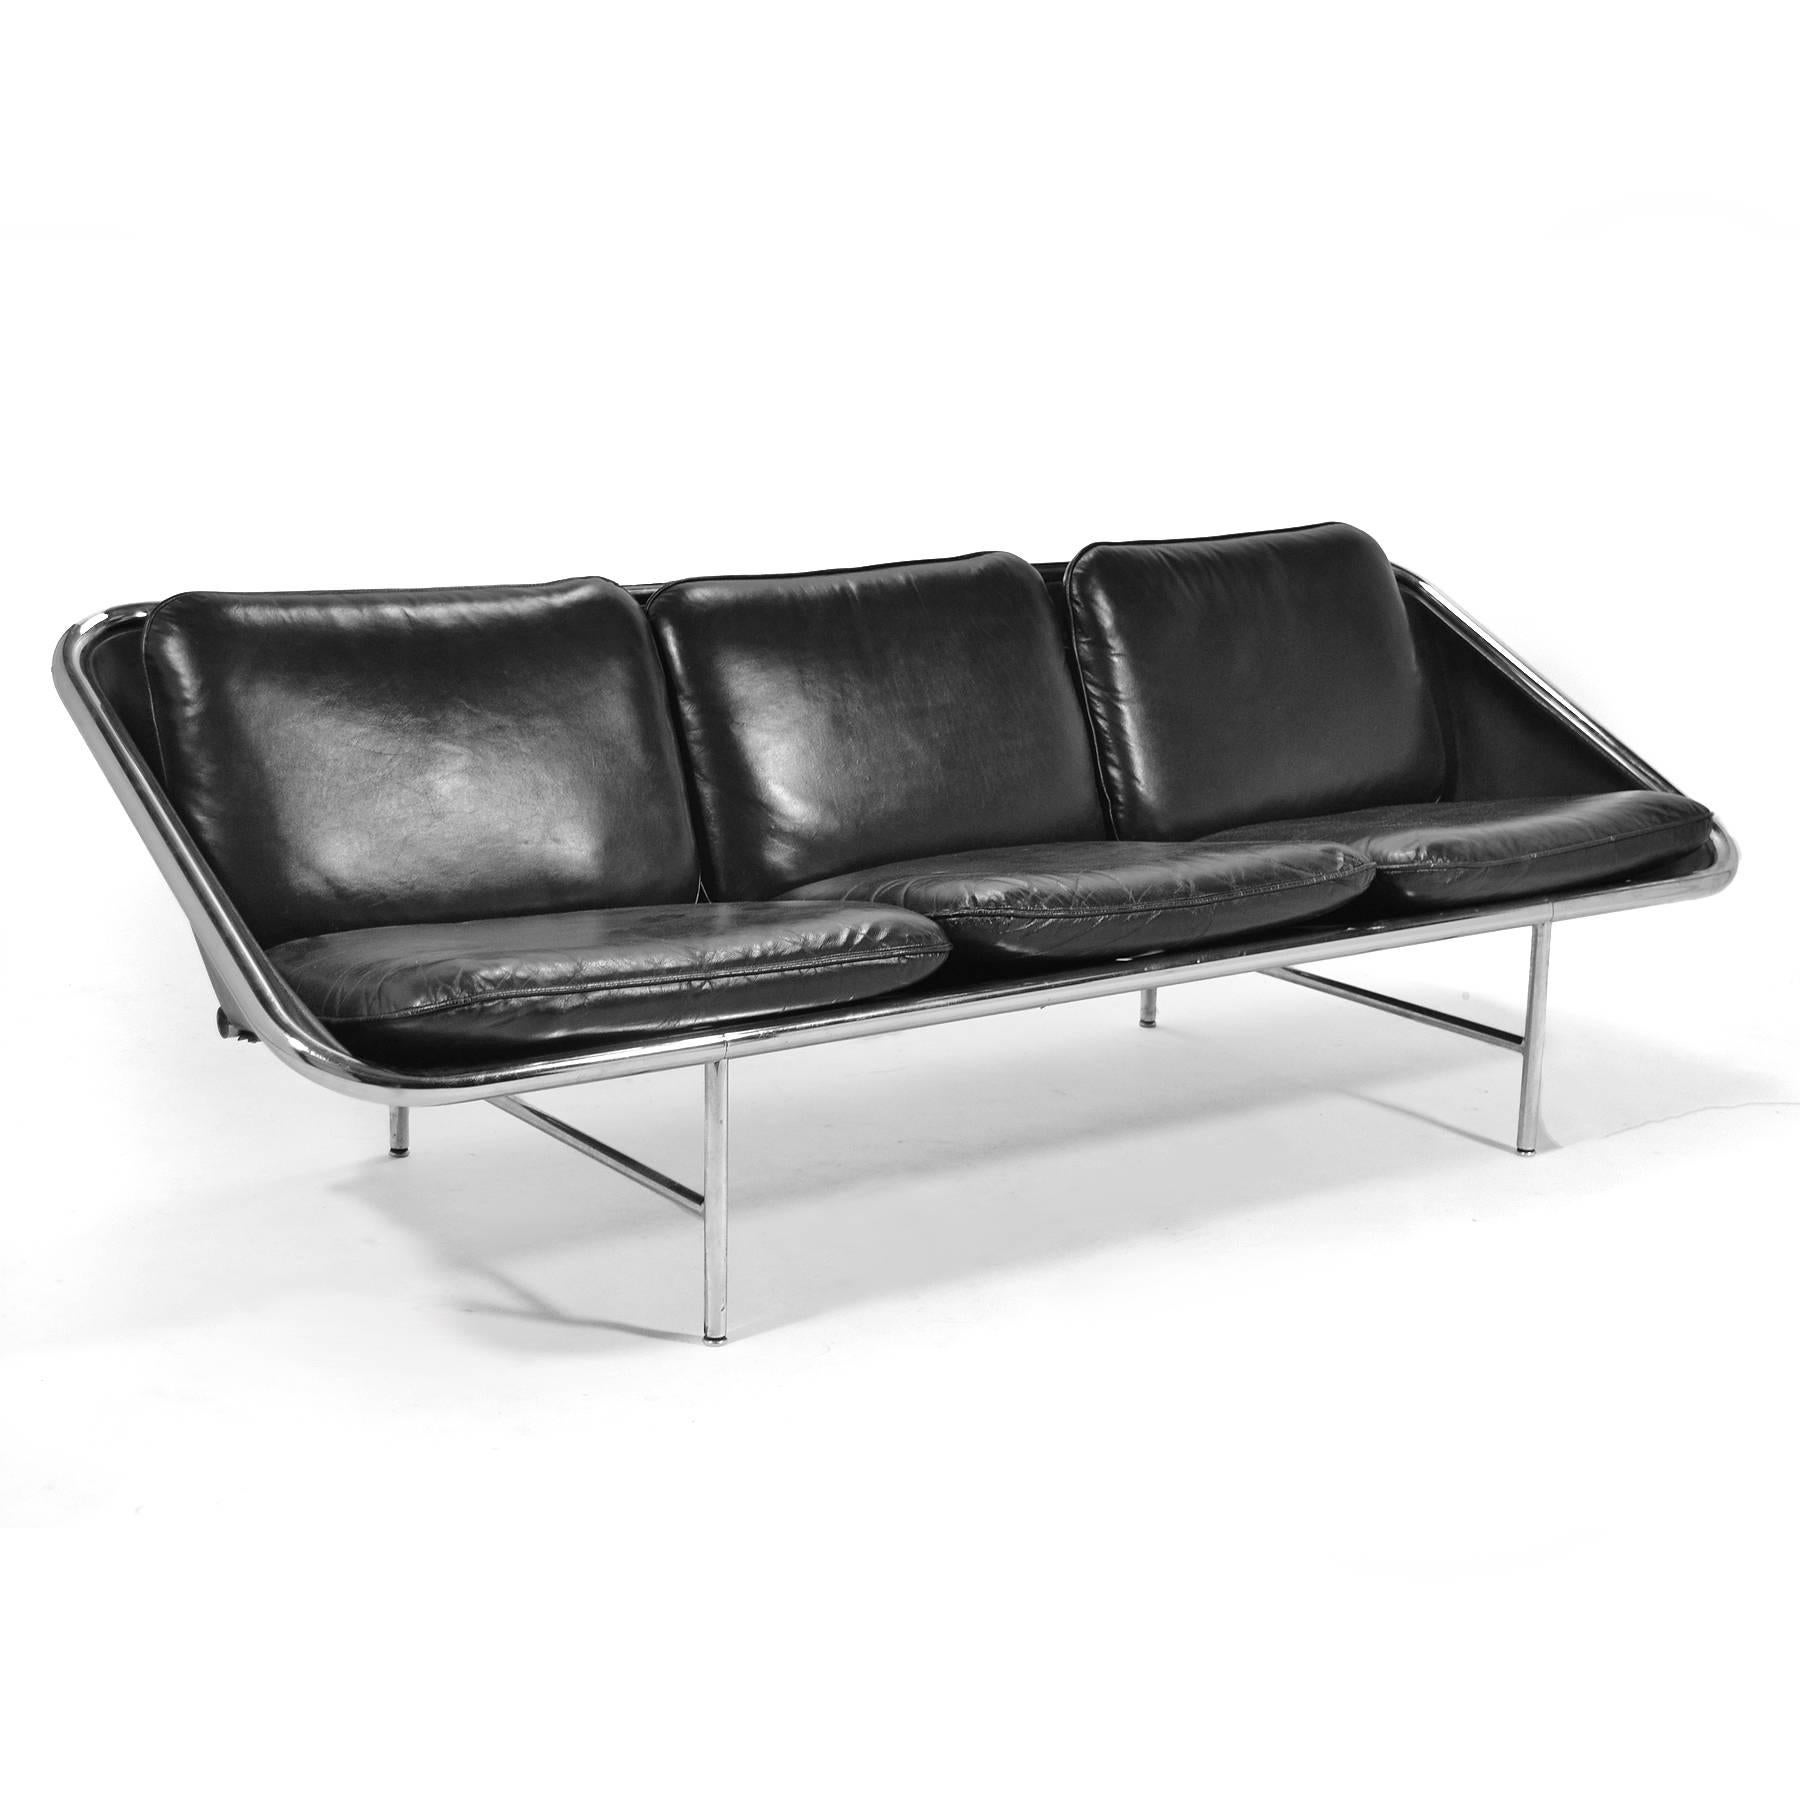 Designed in 1963 by John Svezia, Ronal Beckman and Irving Harper for George Nelson and Assoc. the sling sofa is an innovative design which uses a chrome-plated tubular steel frame, thick leather, neoprene and reinforced rubber to suspend the seat